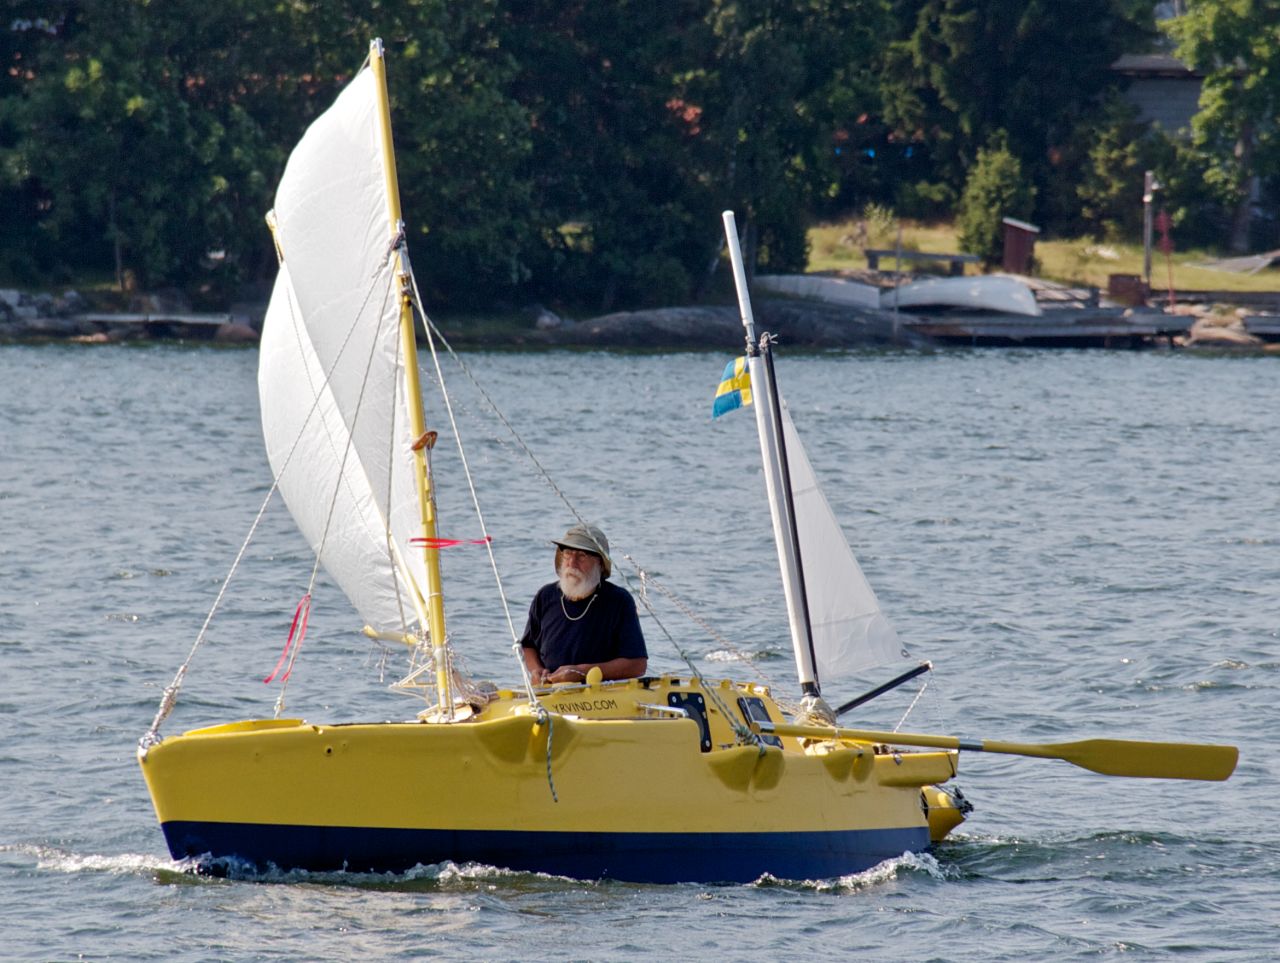 In a career spanning more than 50 years, Yrvind is showing no signs of slowing down. Last year he sailed 4.5 meter boat "Yrvind.com" (pictured) from Ireland to the Caribbean.